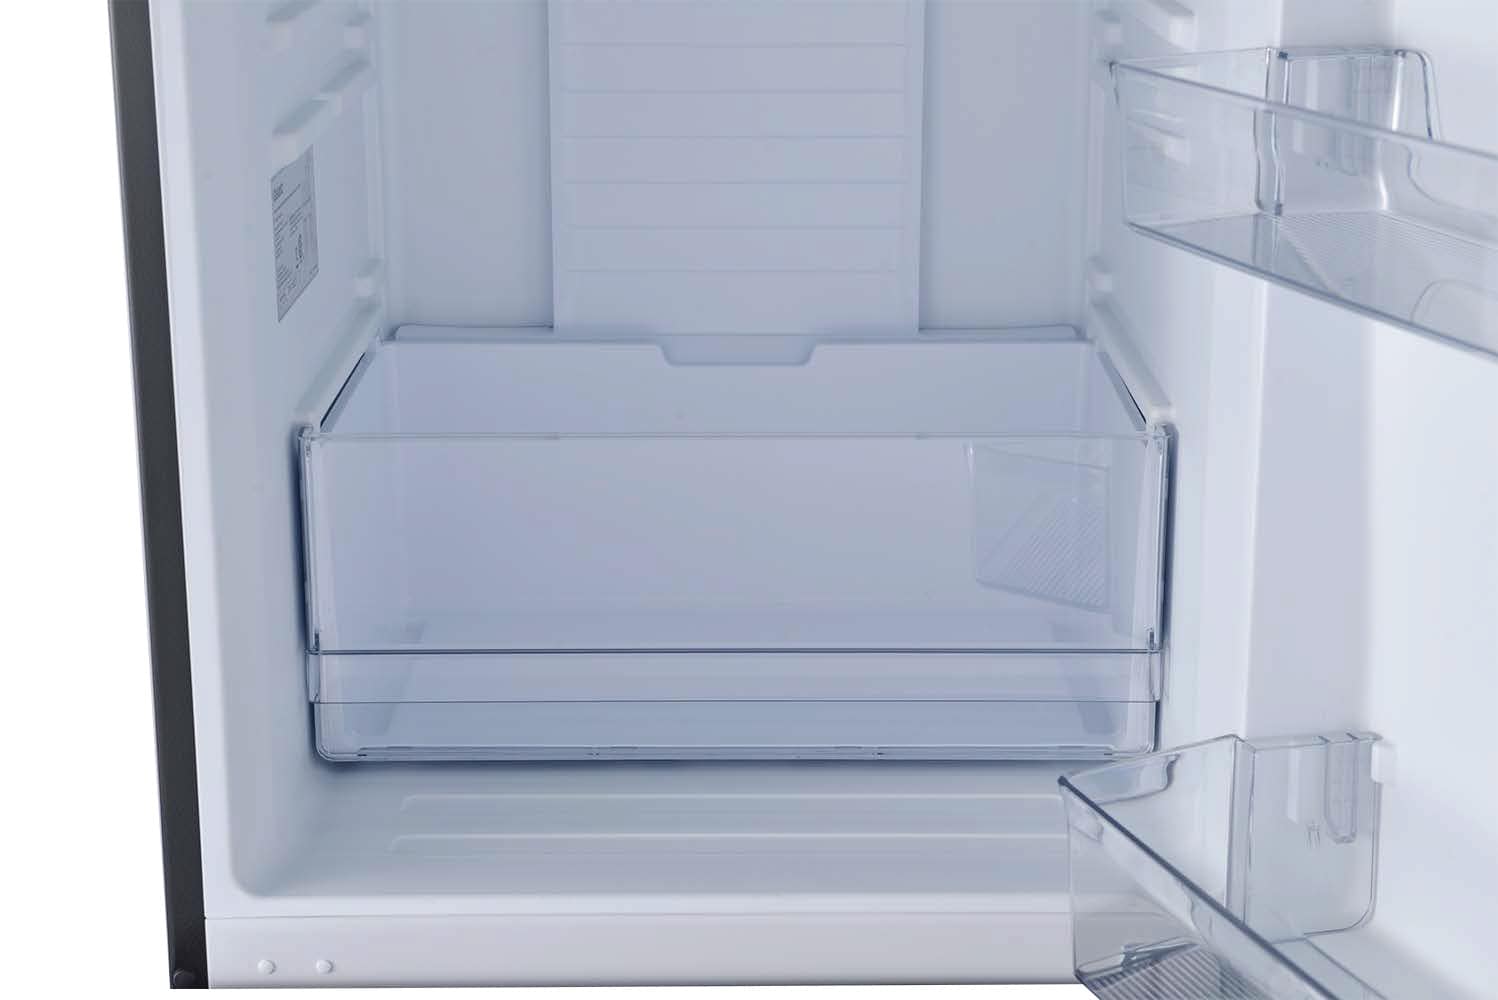 GLR12BS2K16 by Galanz - Galanz 12.4 Cu Ft Built In Ice Makers Refrigerator  in Stainless Steel